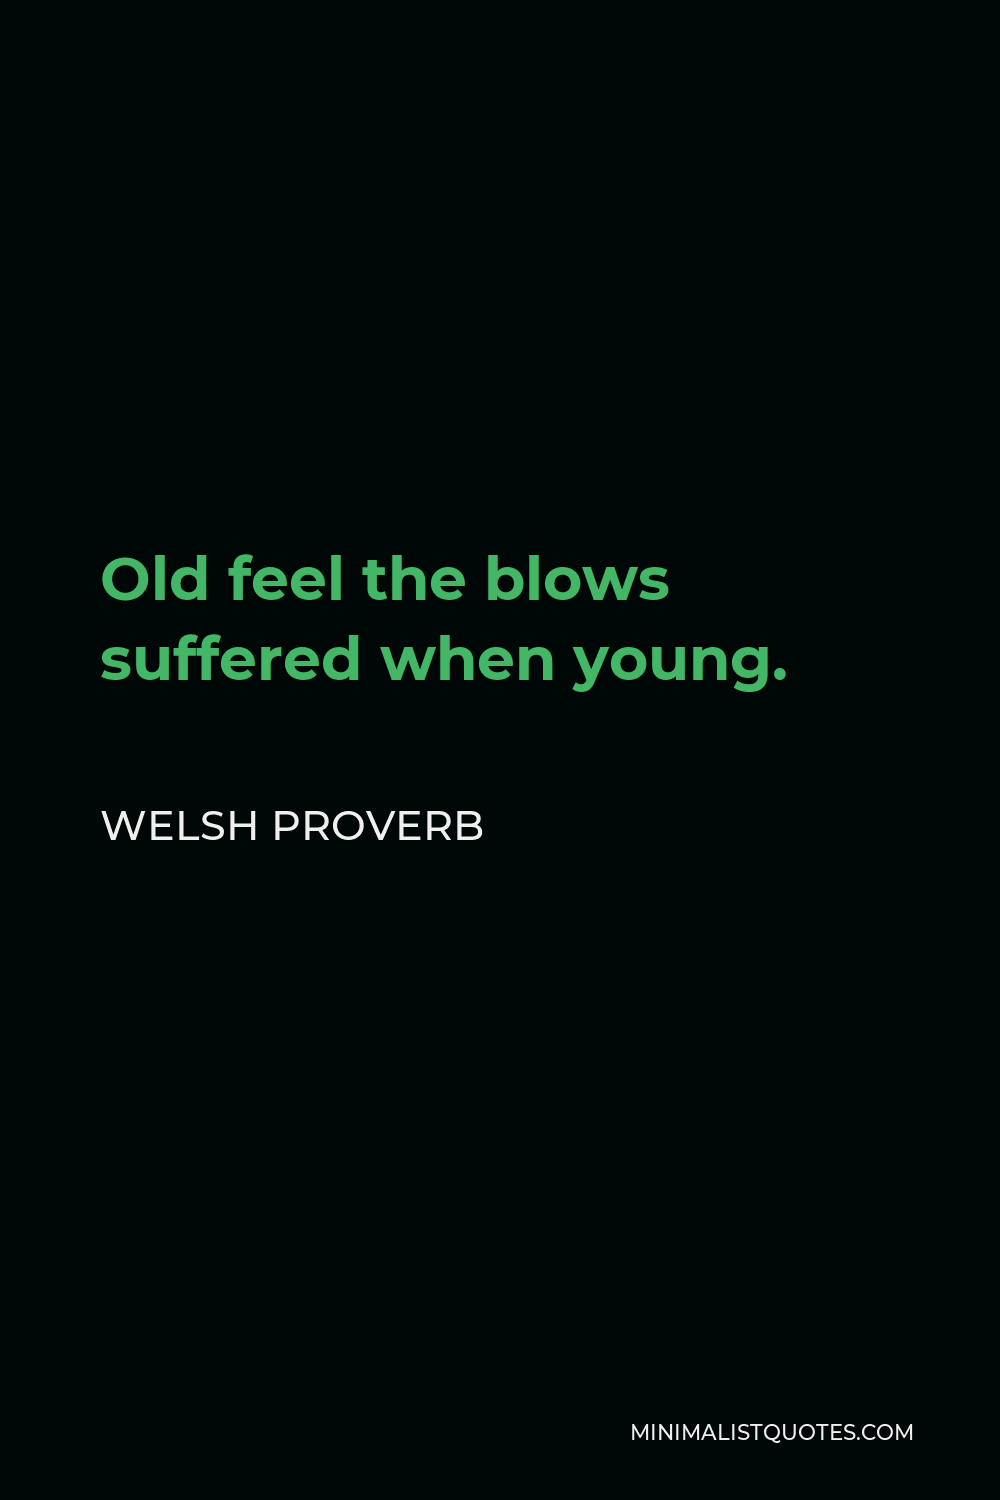 Welsh Proverb Quote - Old feel the blows suffered when young.